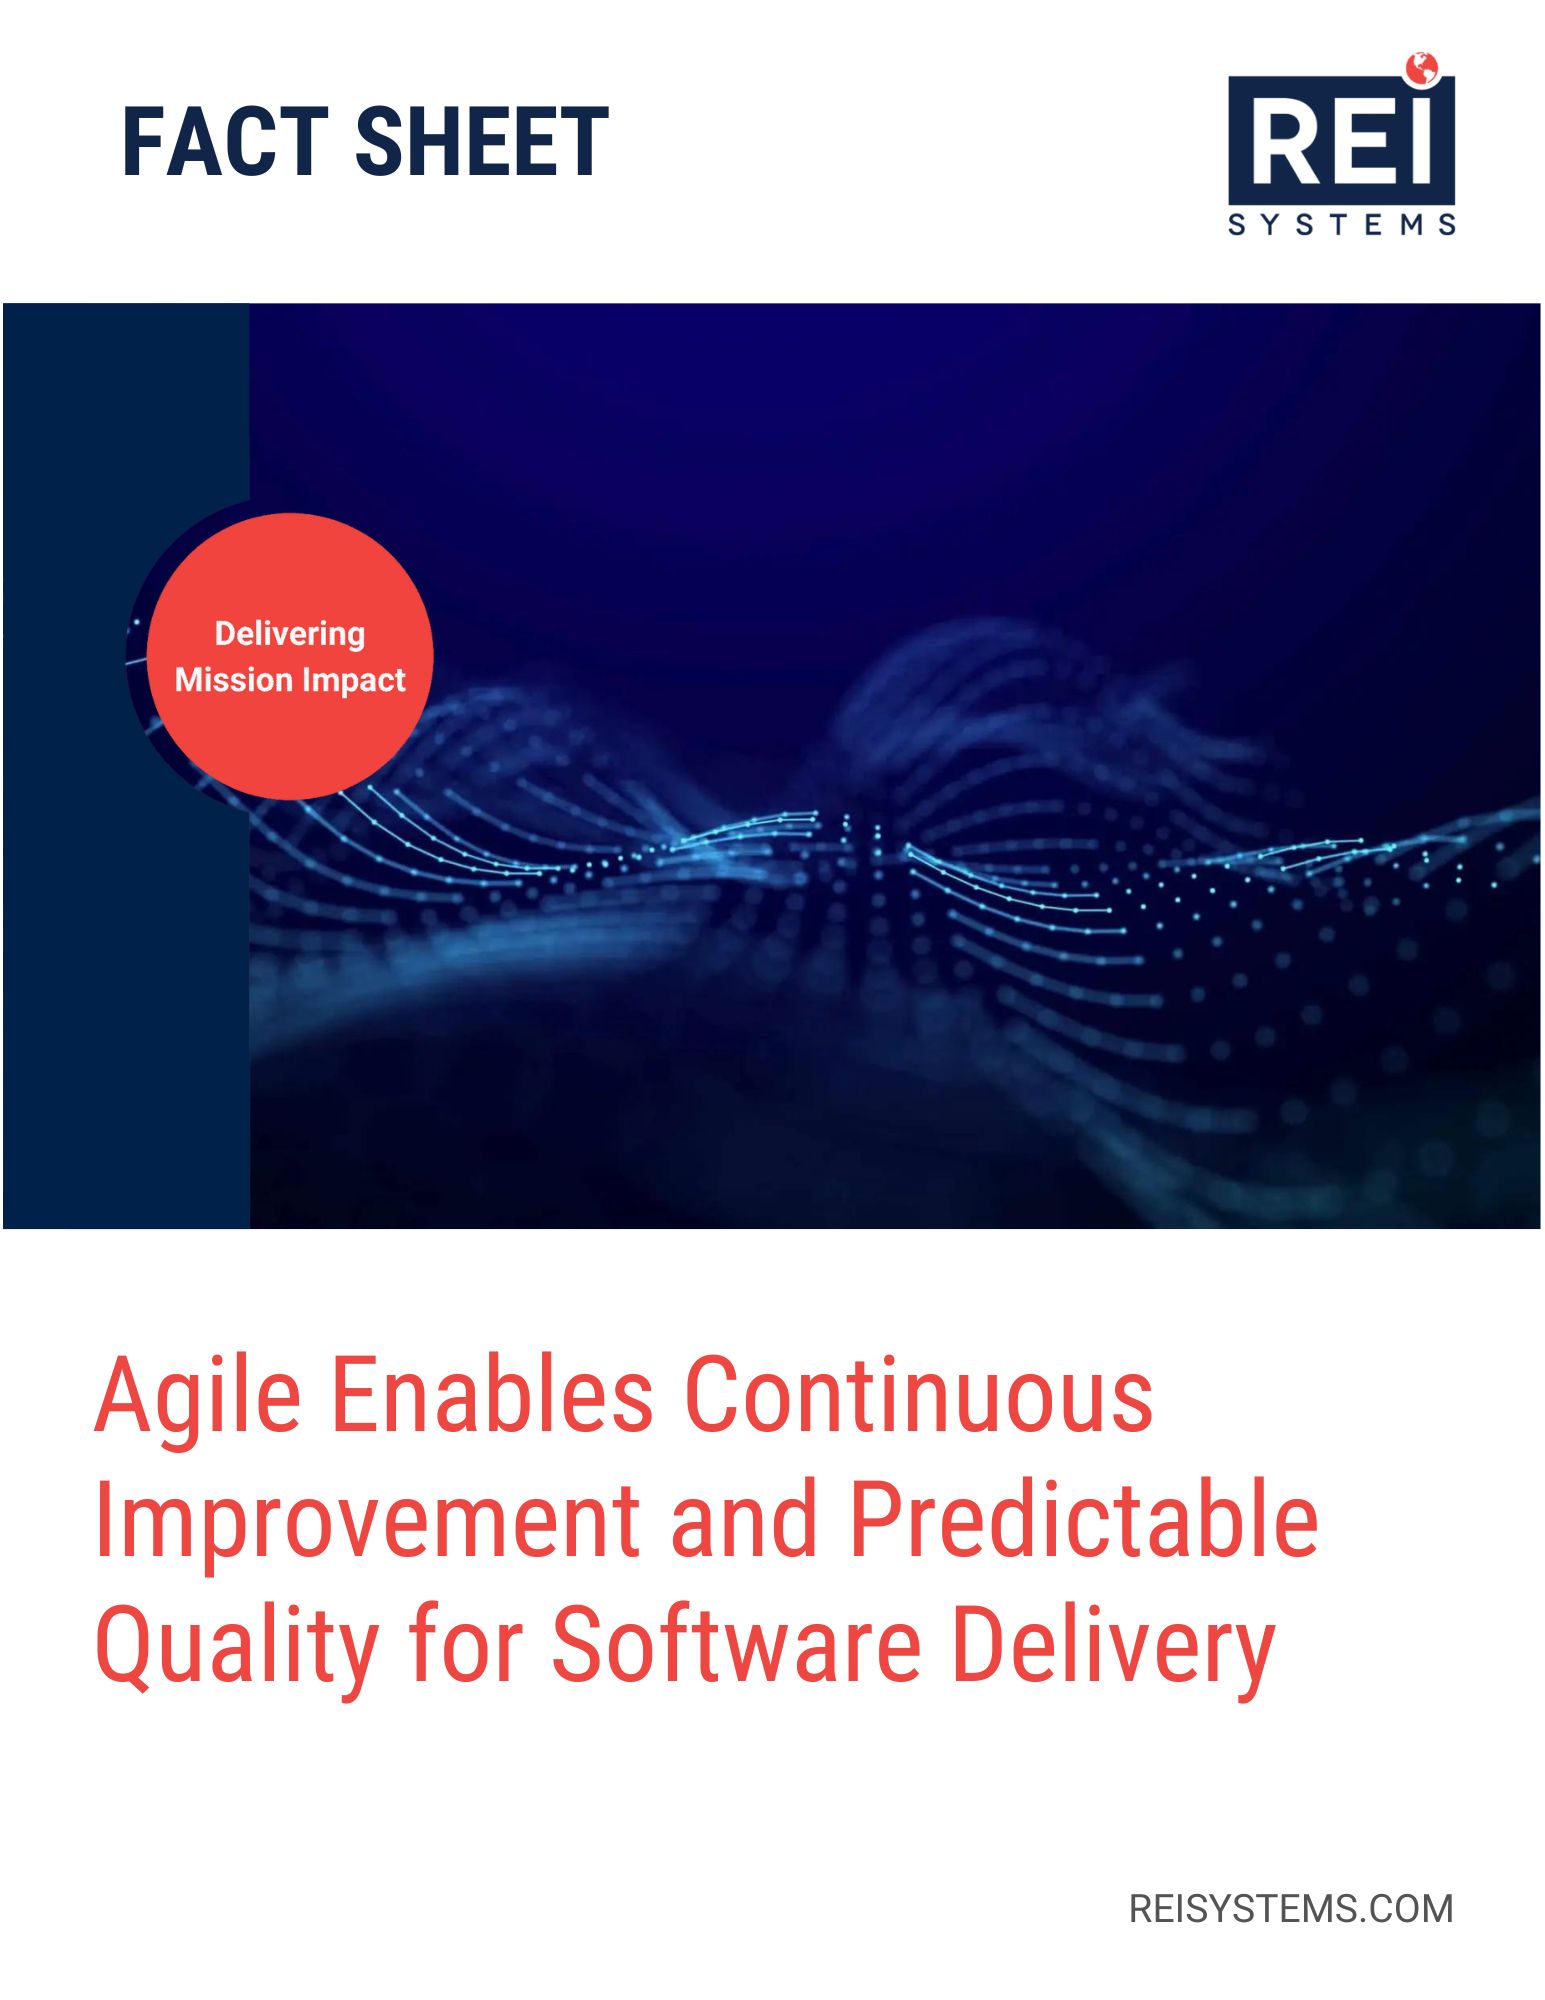 Agile Enables Continuous Improvement and Predictable Quality for Software Delivery